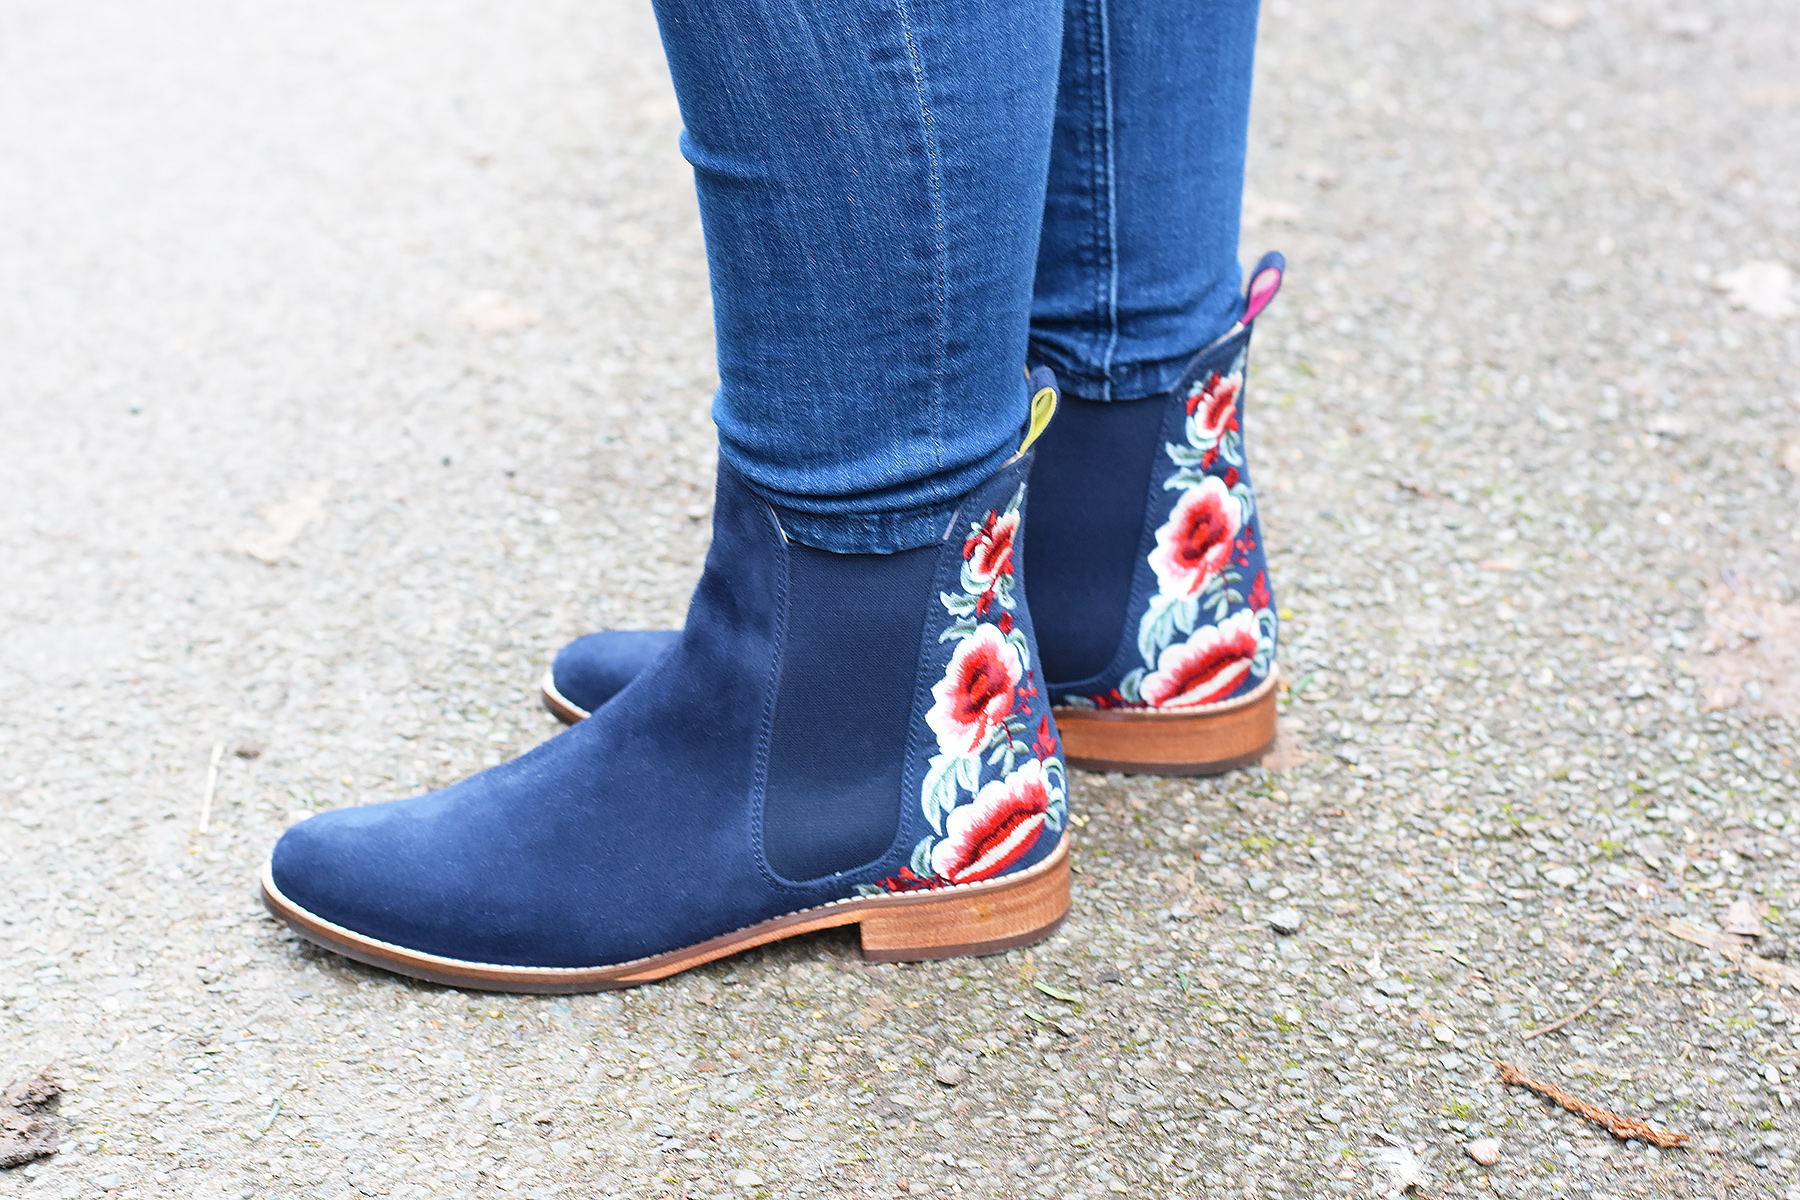 JOULES NAVY FLORAL EMBROIDERED BACK CHELSEA BOOT REVIEW